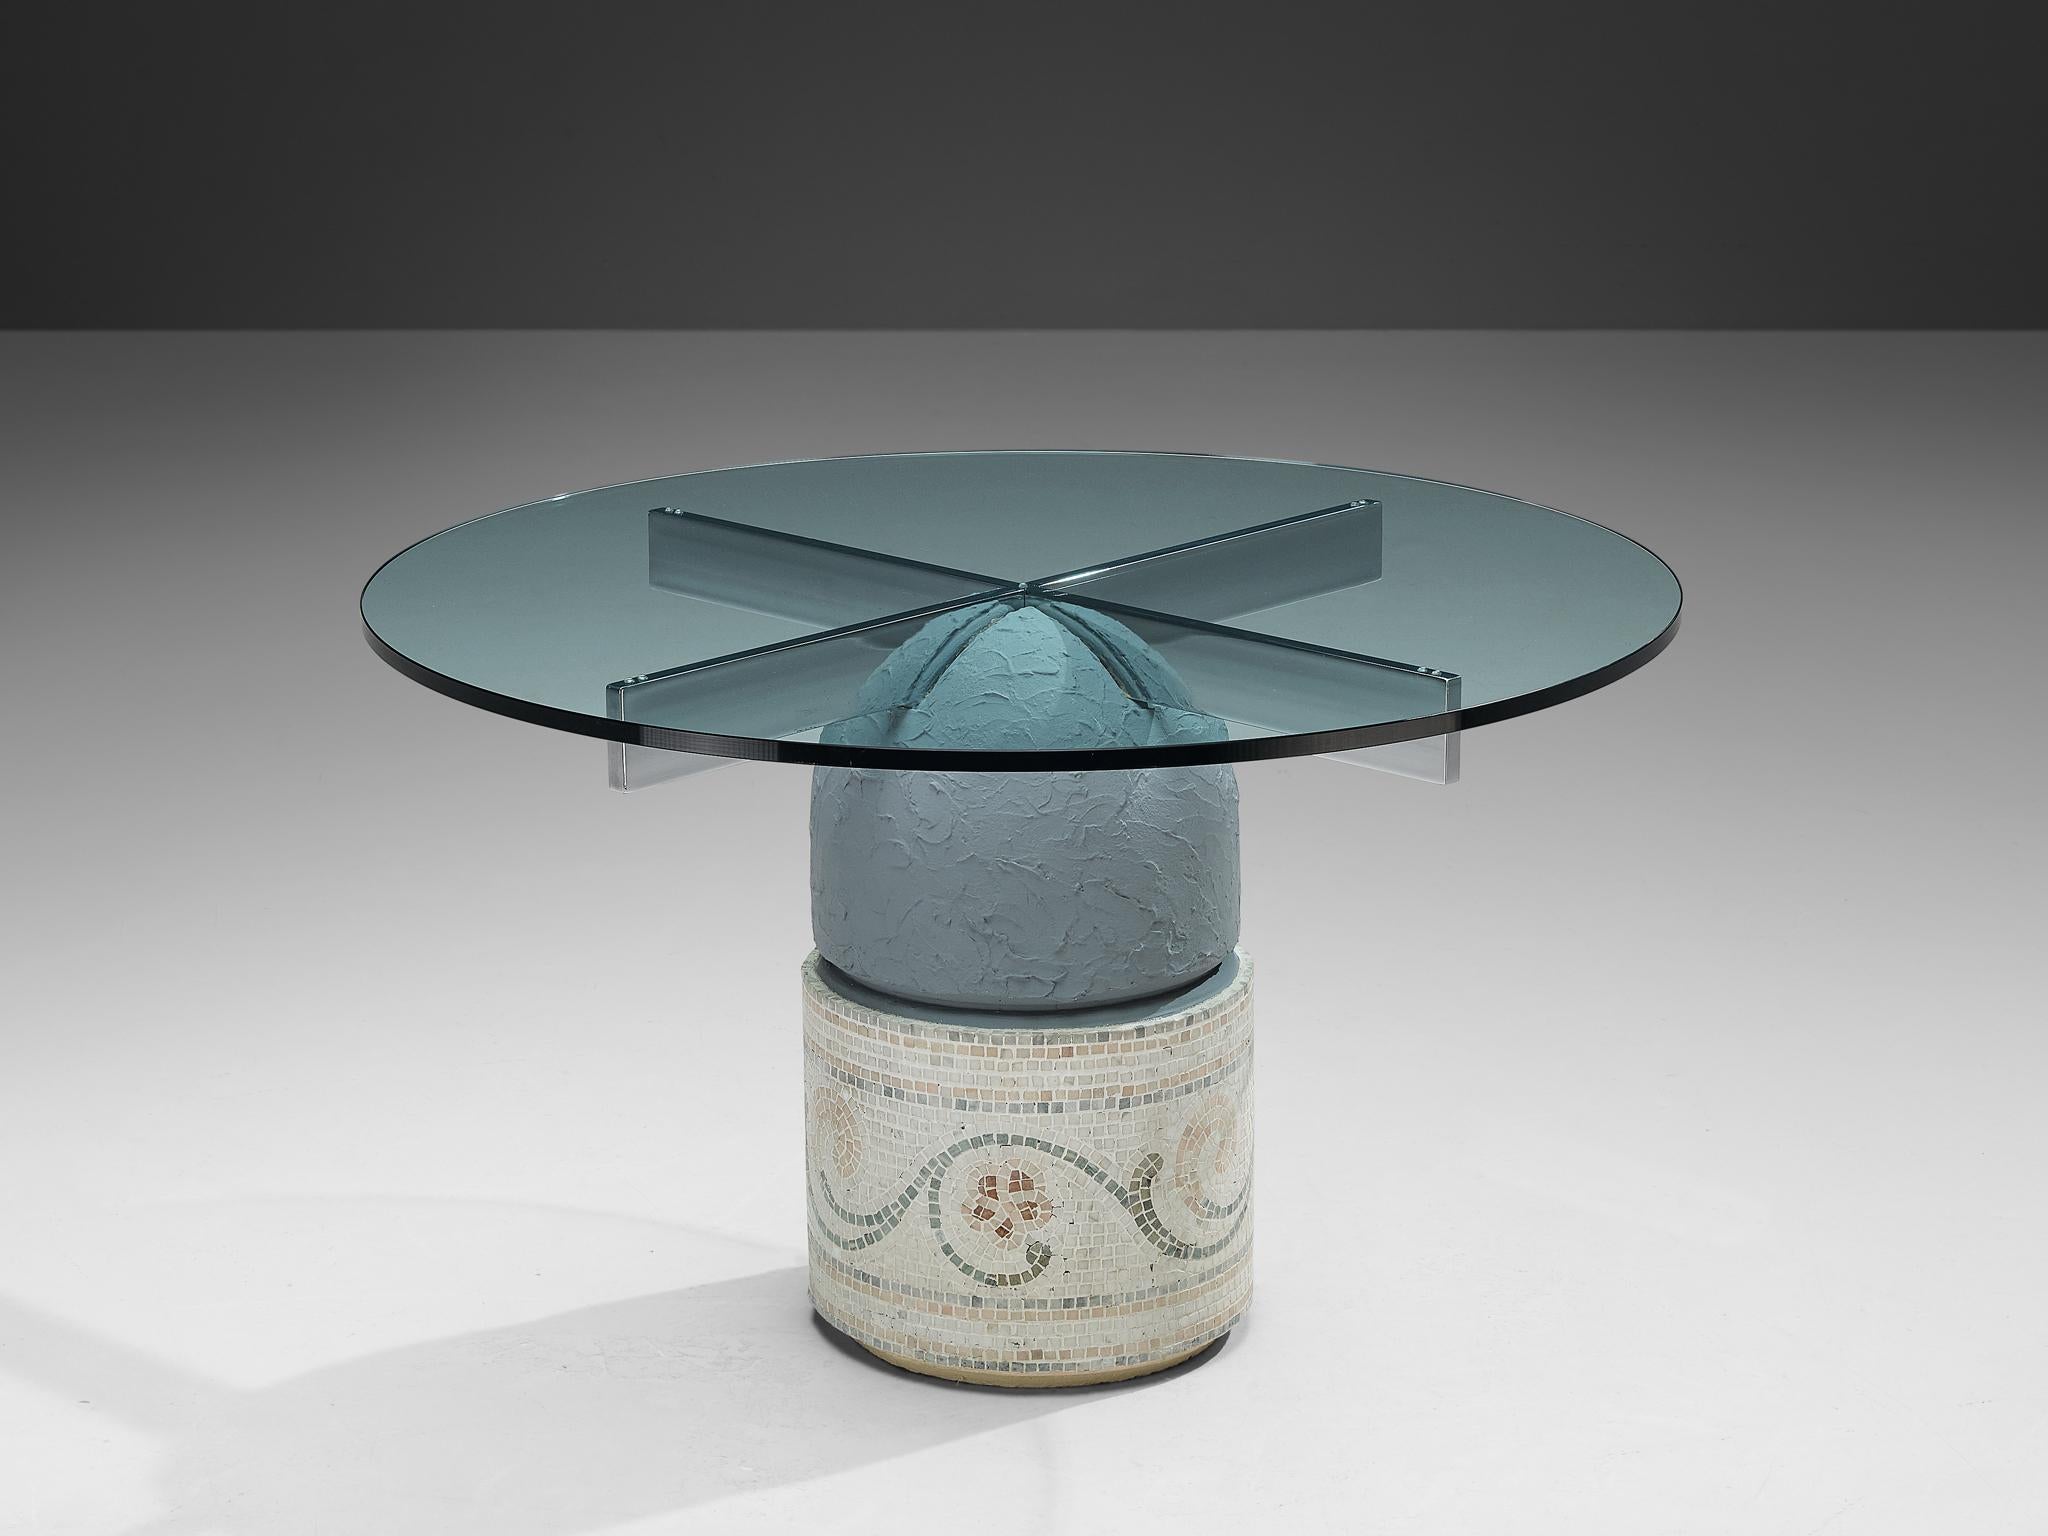 Giovanni Offredi for Saporiti, 'Paracarro' dining table, glass, concrete, chrome-plated steel, mosaic, Italy, 1970

This sculptural dining table is designed by Giovanni Offredi for Saporiti in the seventies. This version of the Paracarro design